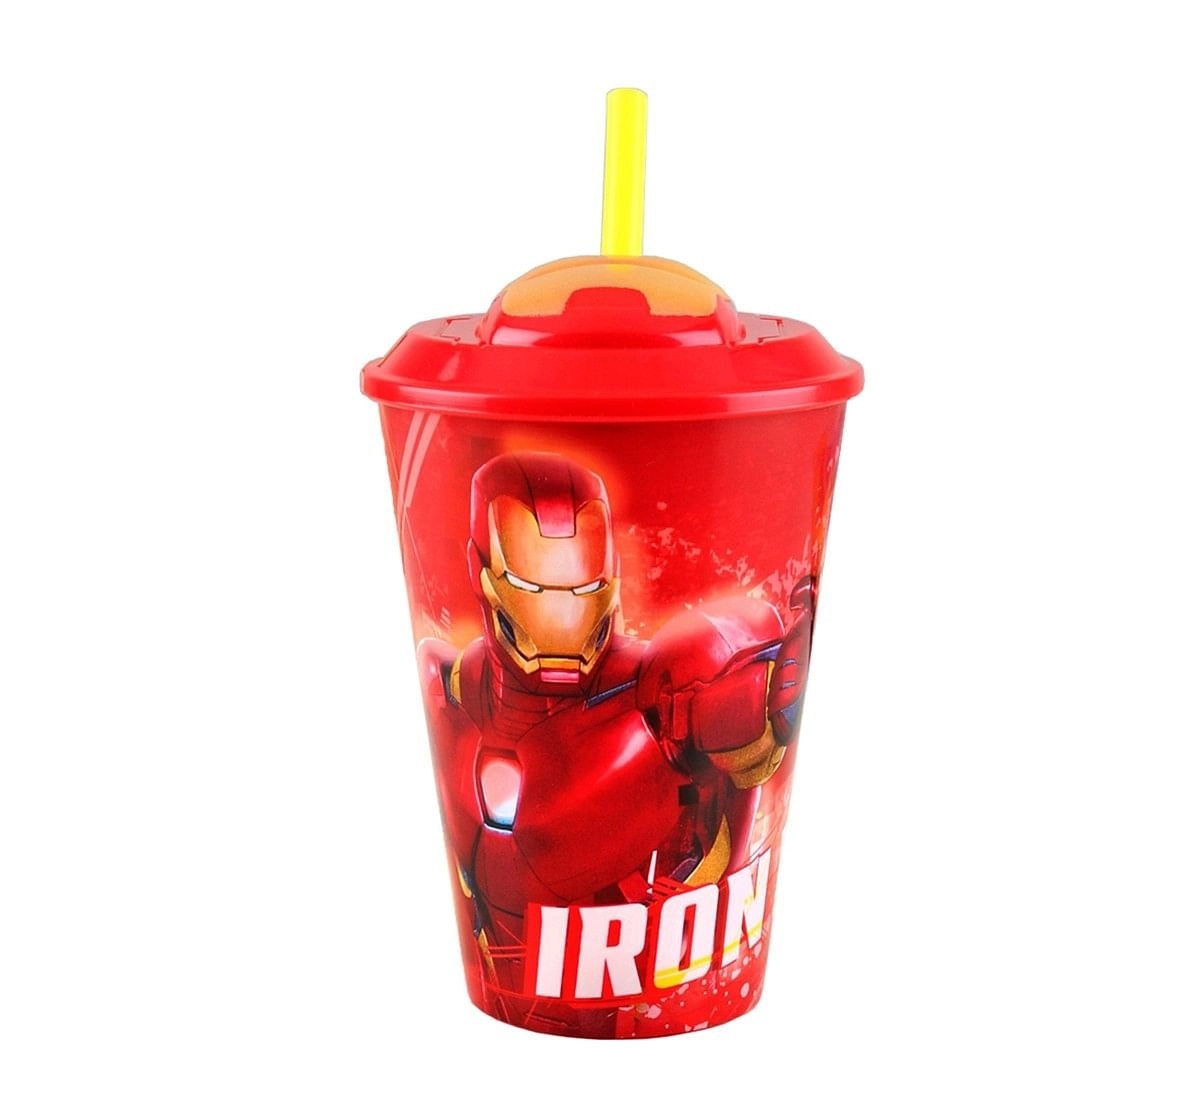 Marvel Story 3D straw Tumbler Avengers Iron Man Quirky Soft Toys for age 3Y+ - 17 Cm (Red), 415 ml 